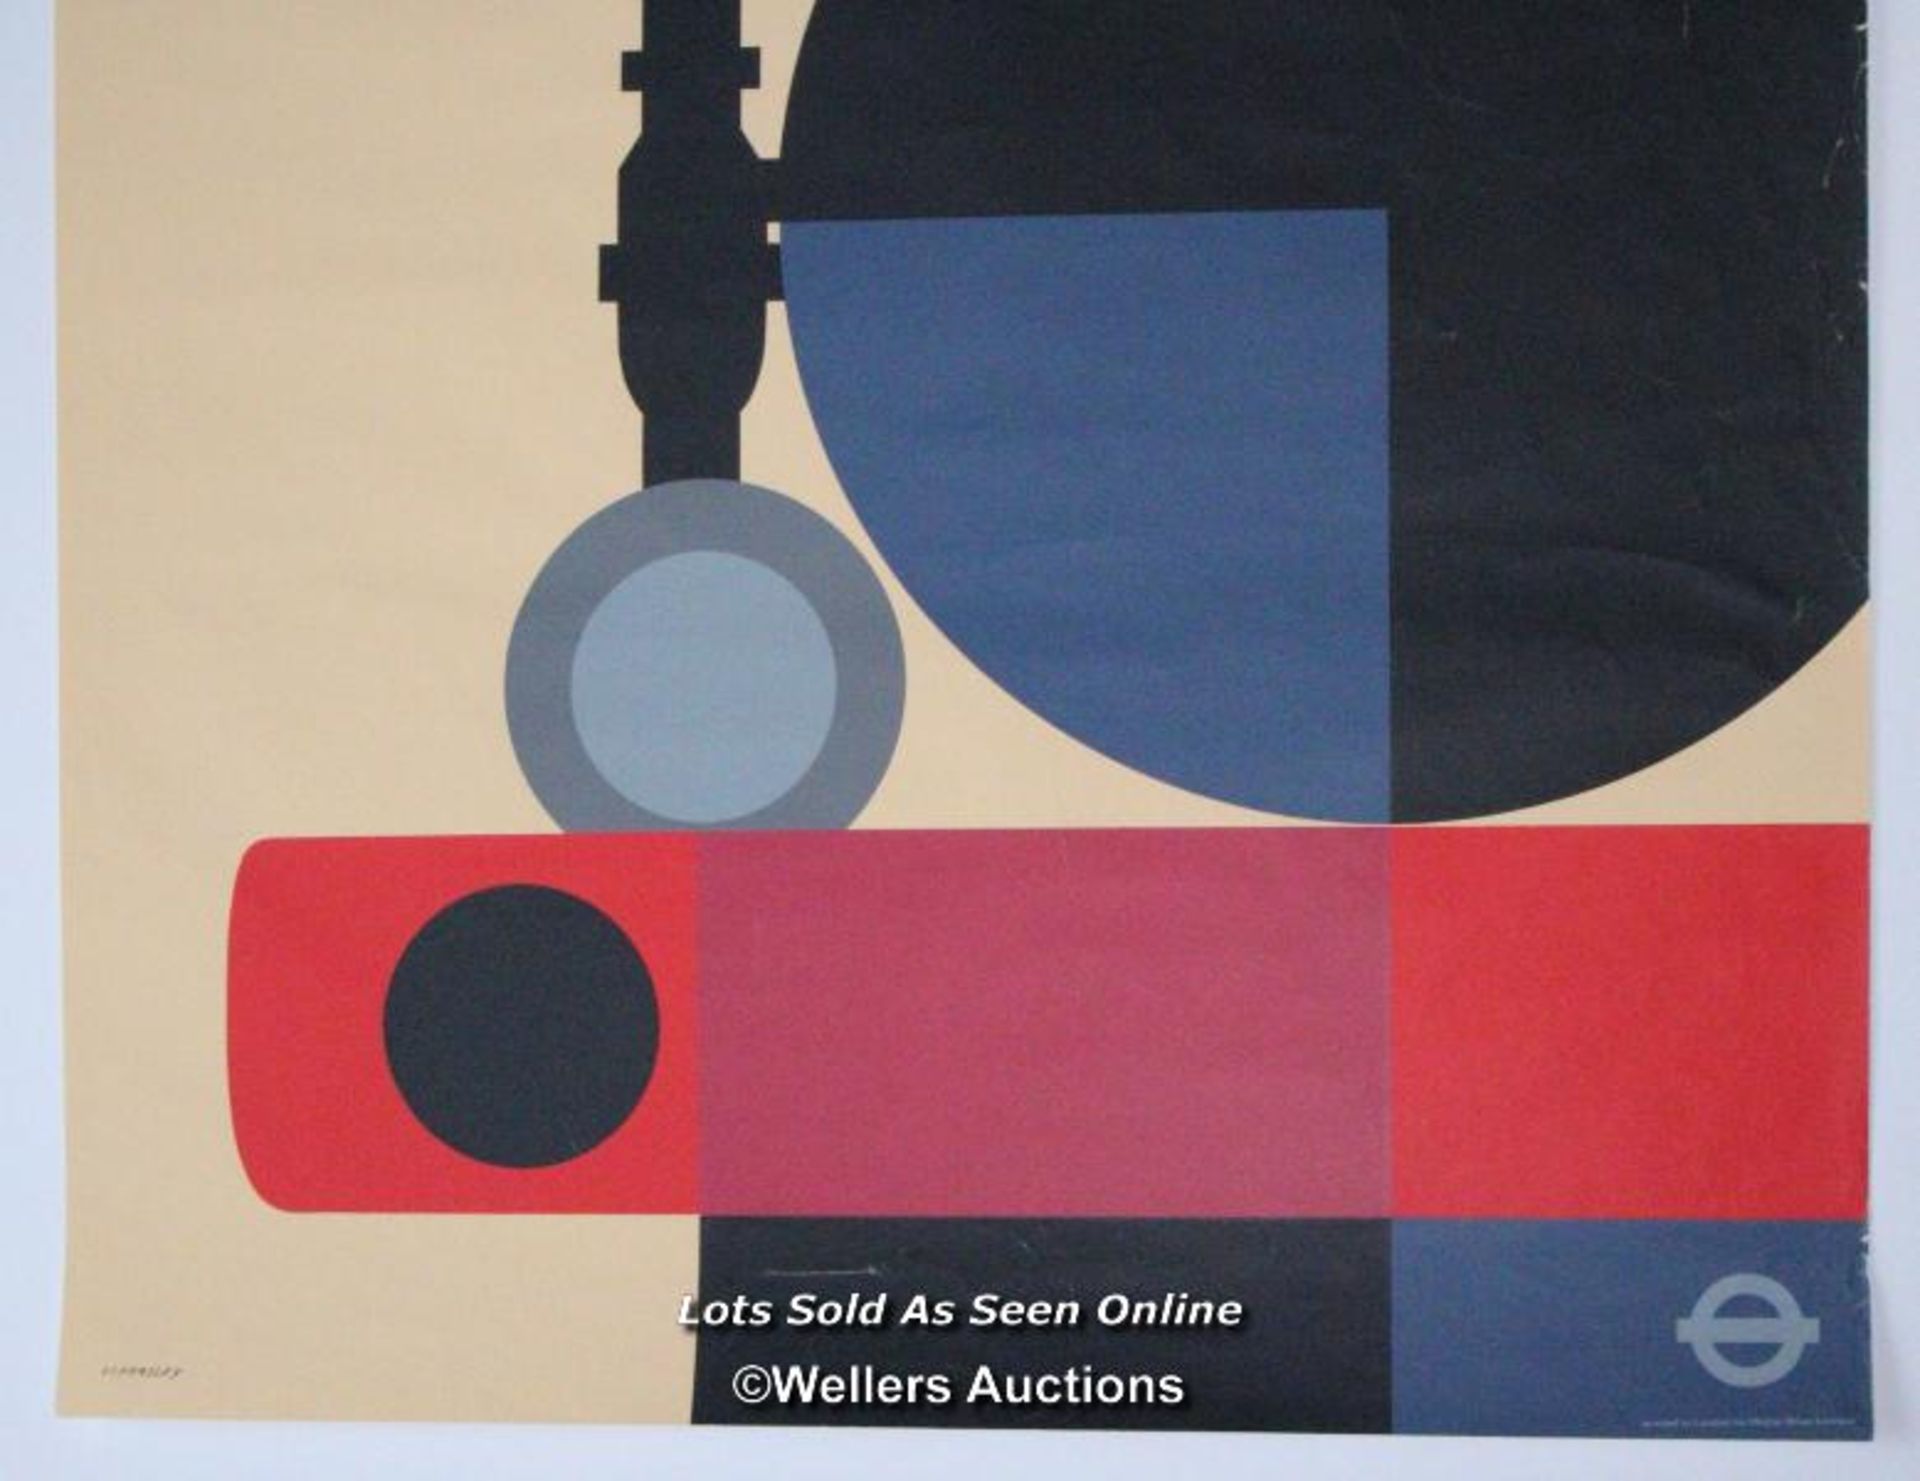 Original London Transport poster by Tom Eckersley, 1975 - Image 4 of 4